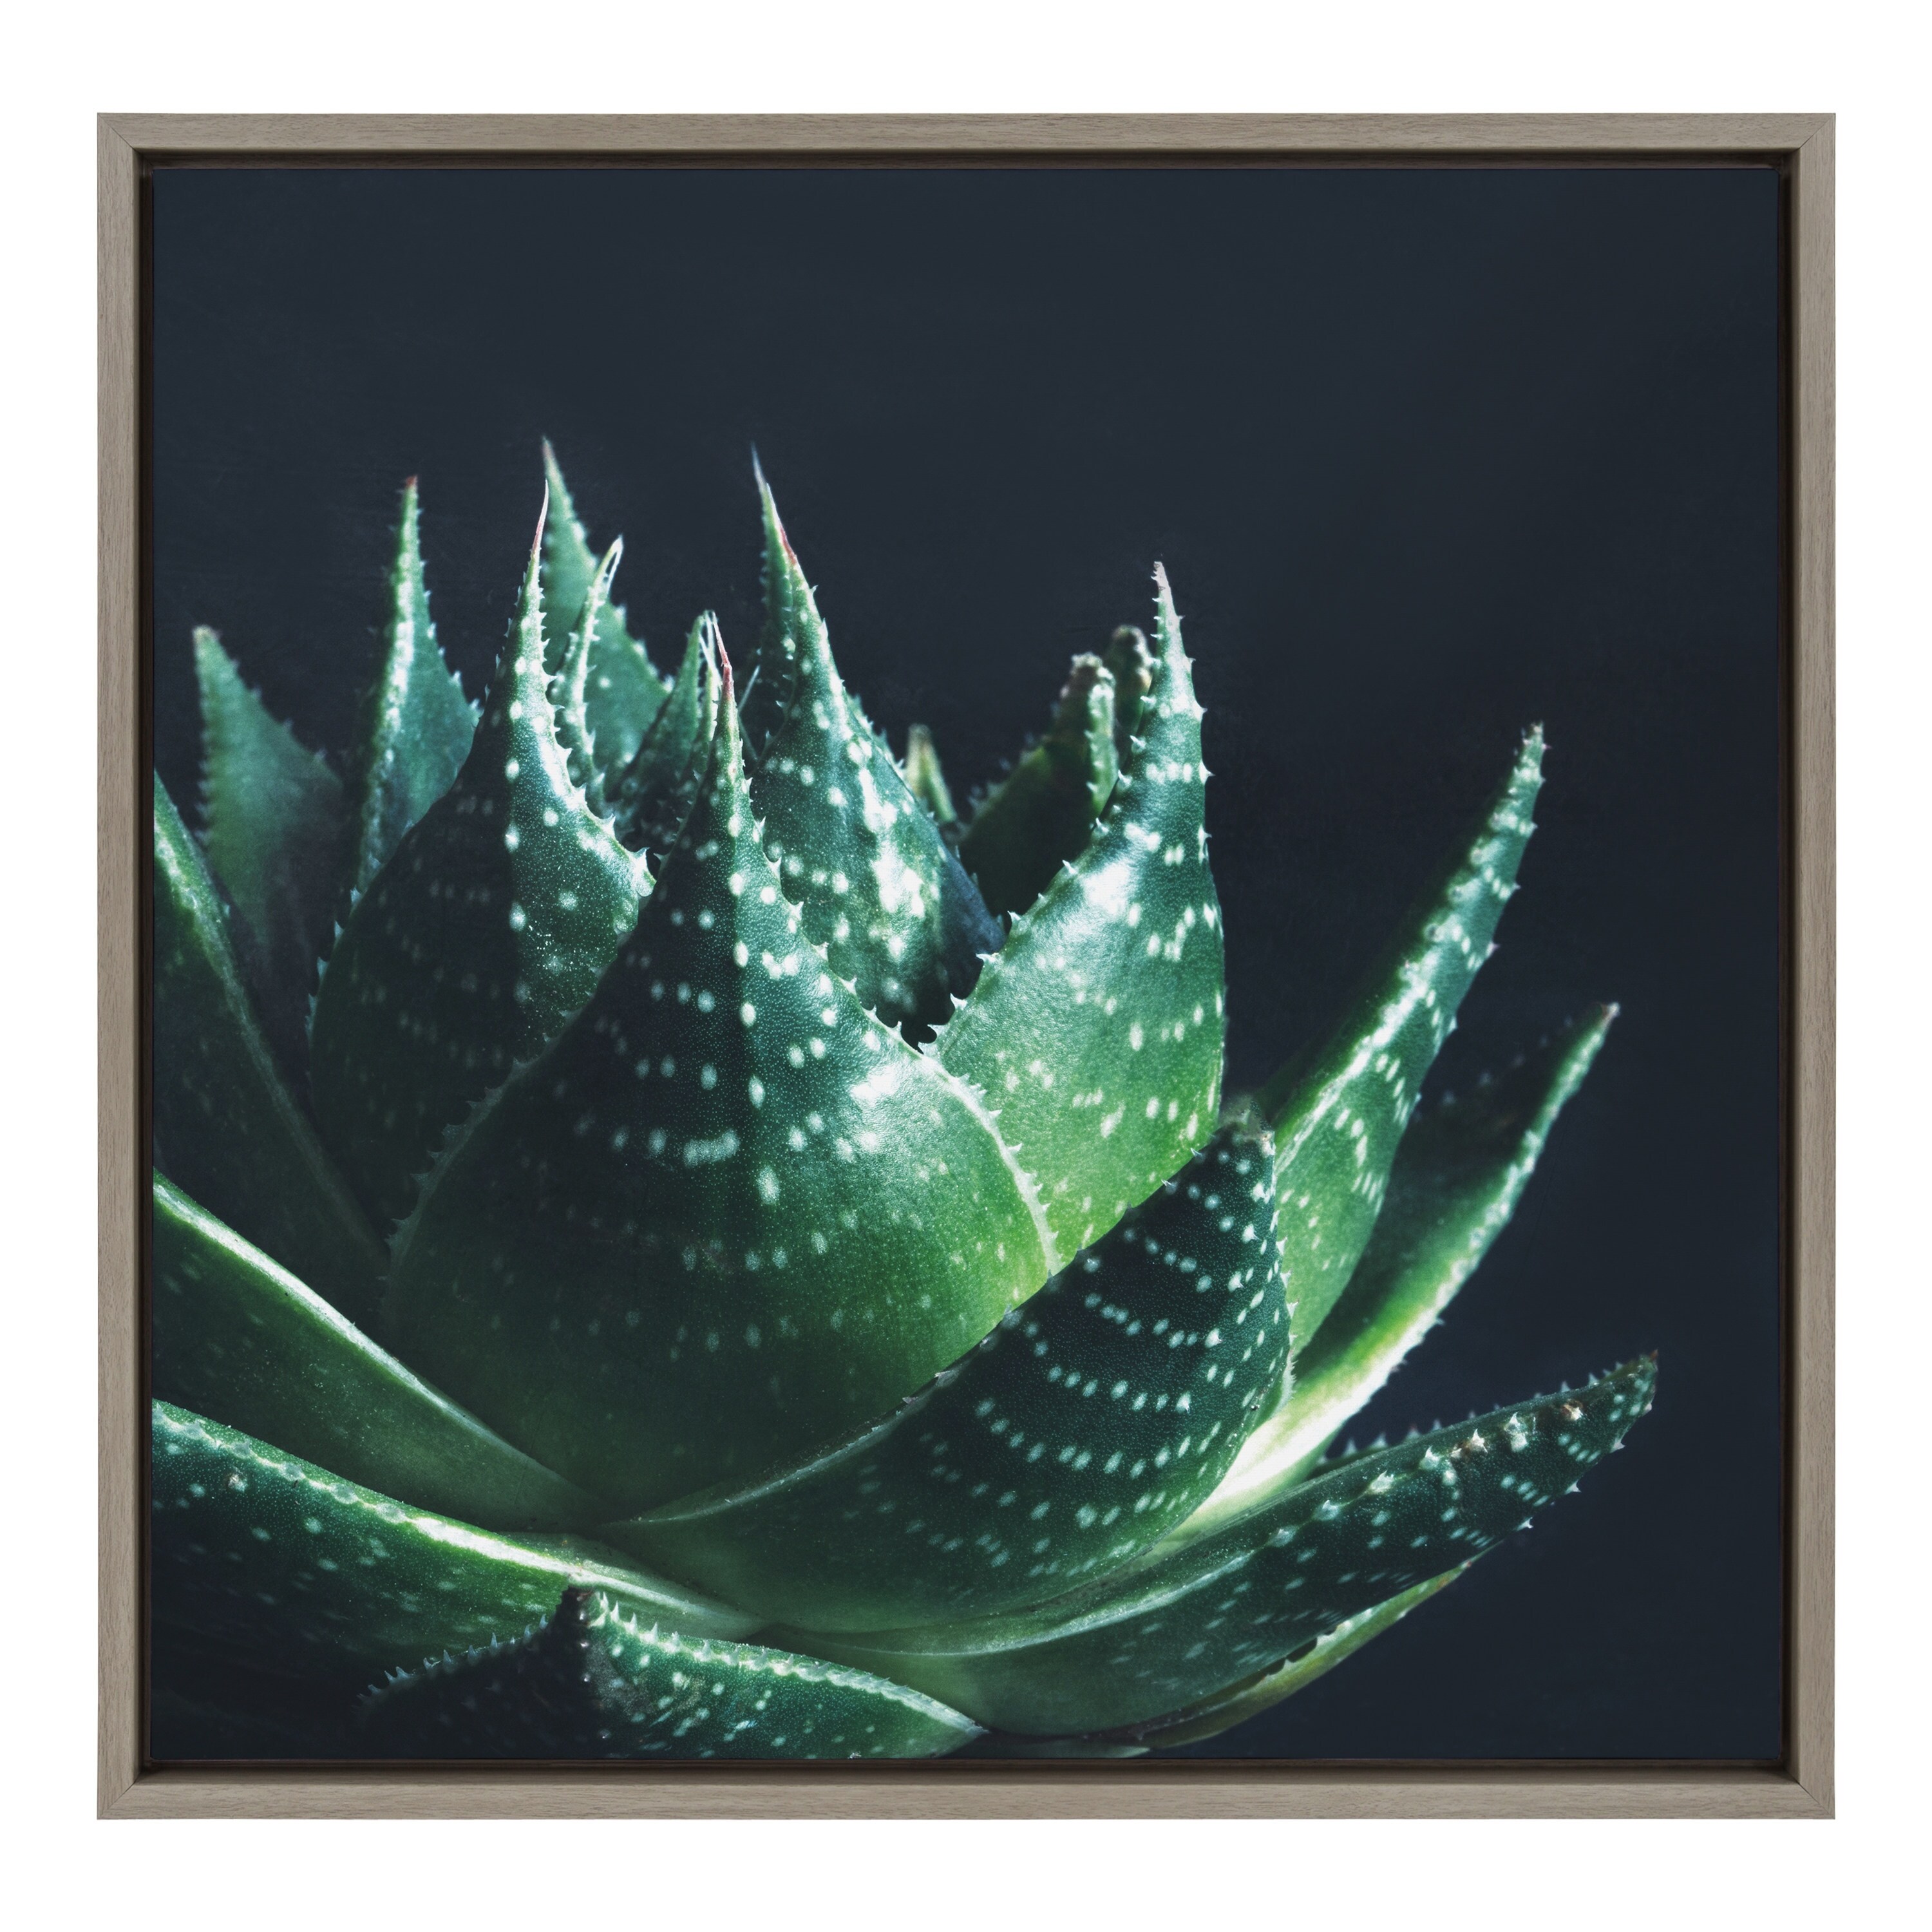 Kate and Laurel Sylvie Zen Framed Canvas by F2Images Bed Bath  Beyond  32615557